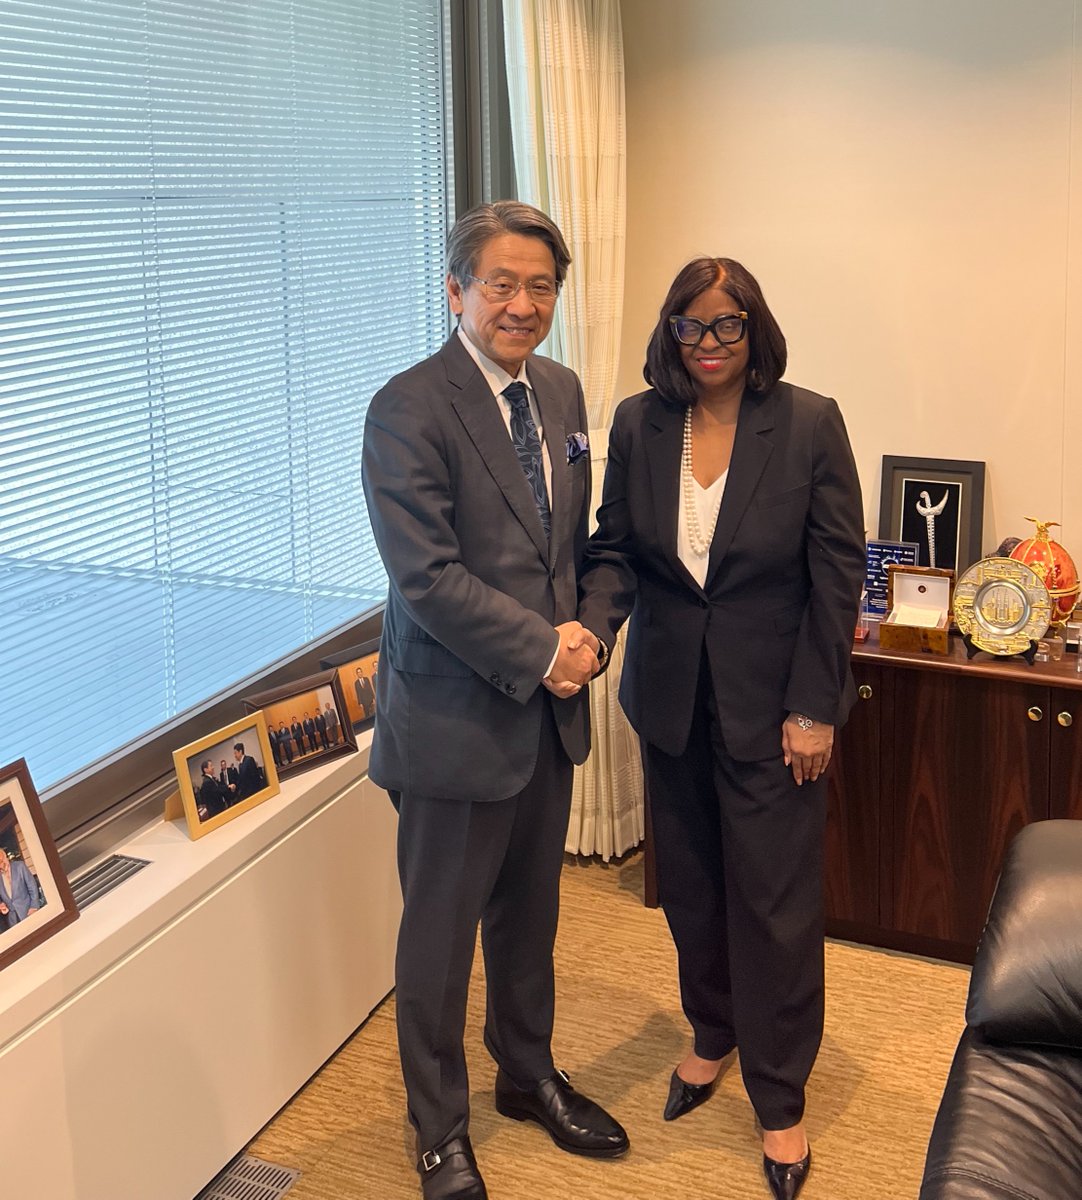 EXIM is committed to enhancing collaboration w/ our partners at Japan Bank for Intl Cooperation. Met w/ Chair Tadashi Maeda to discuss how #EXIM & #JBIC can play a key role in advancing U.S.-Japan bilateral relations & unlocking the vast potential of the Indo-Pacific region.